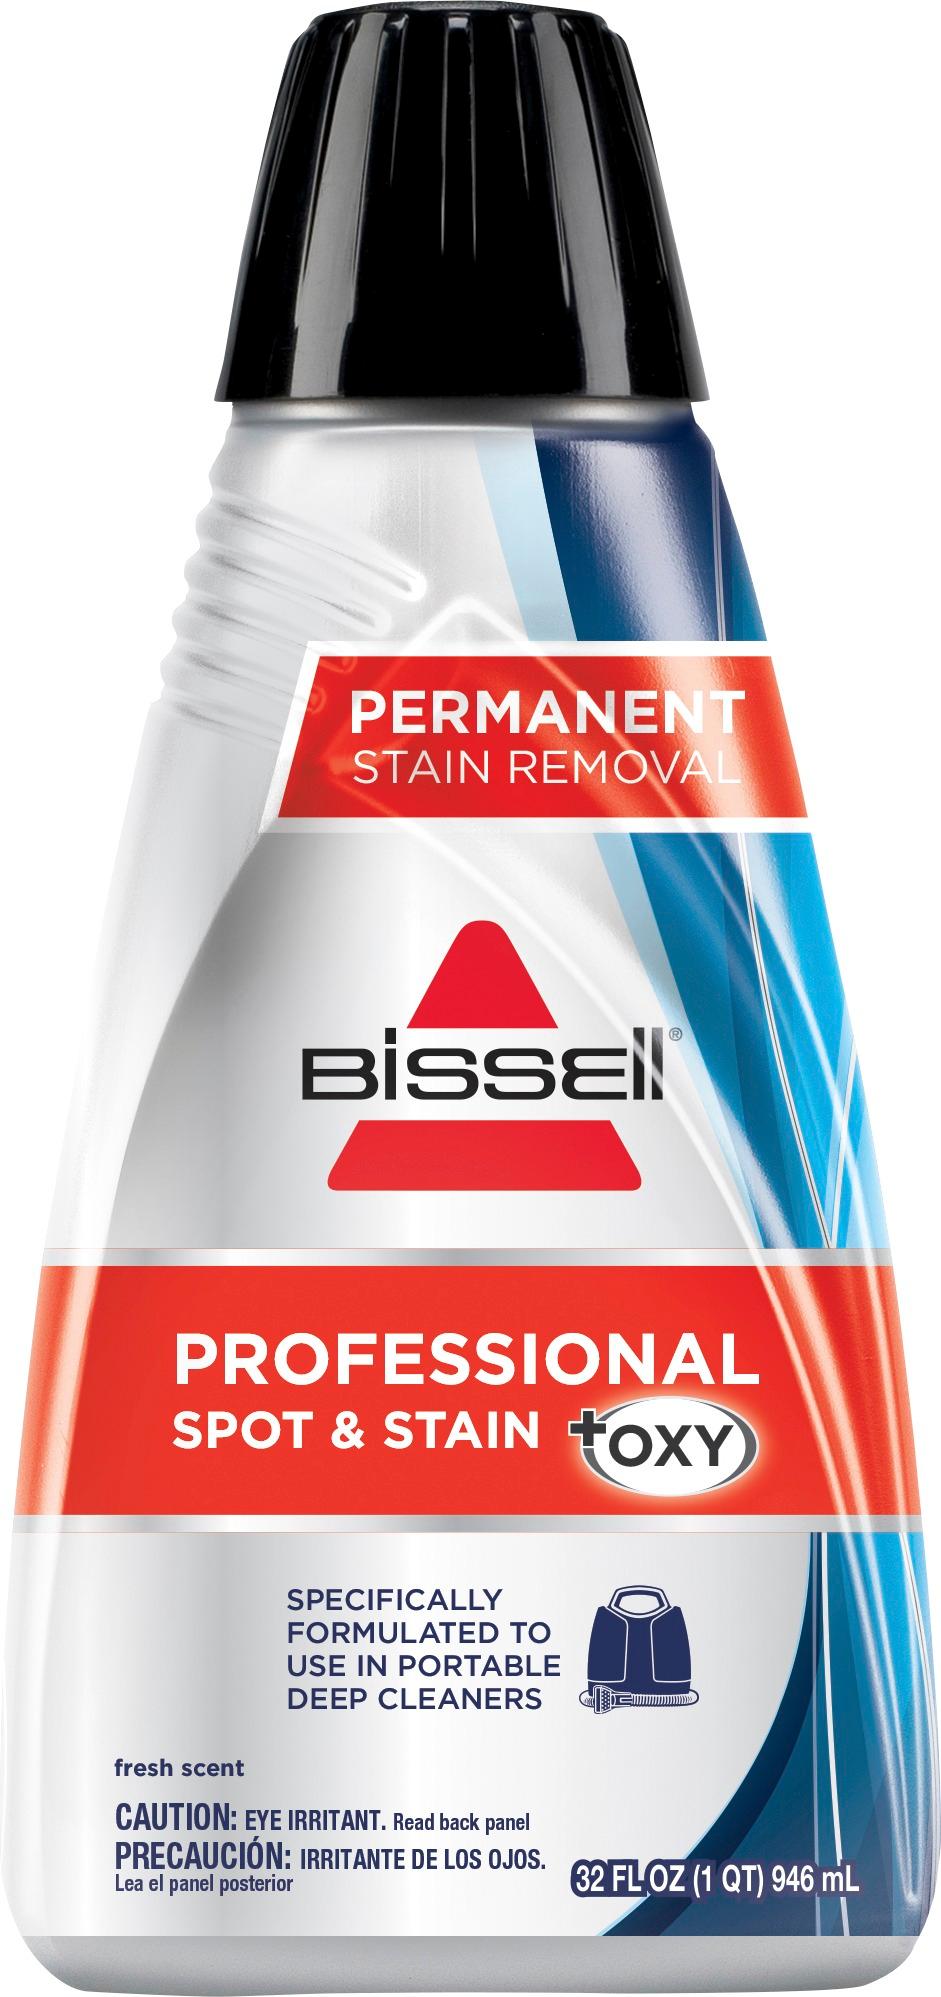 BISSELL Professional Spot & Stain + Oxy 32-Oz. Cleaner Multicolor 2038 -  Best Buy